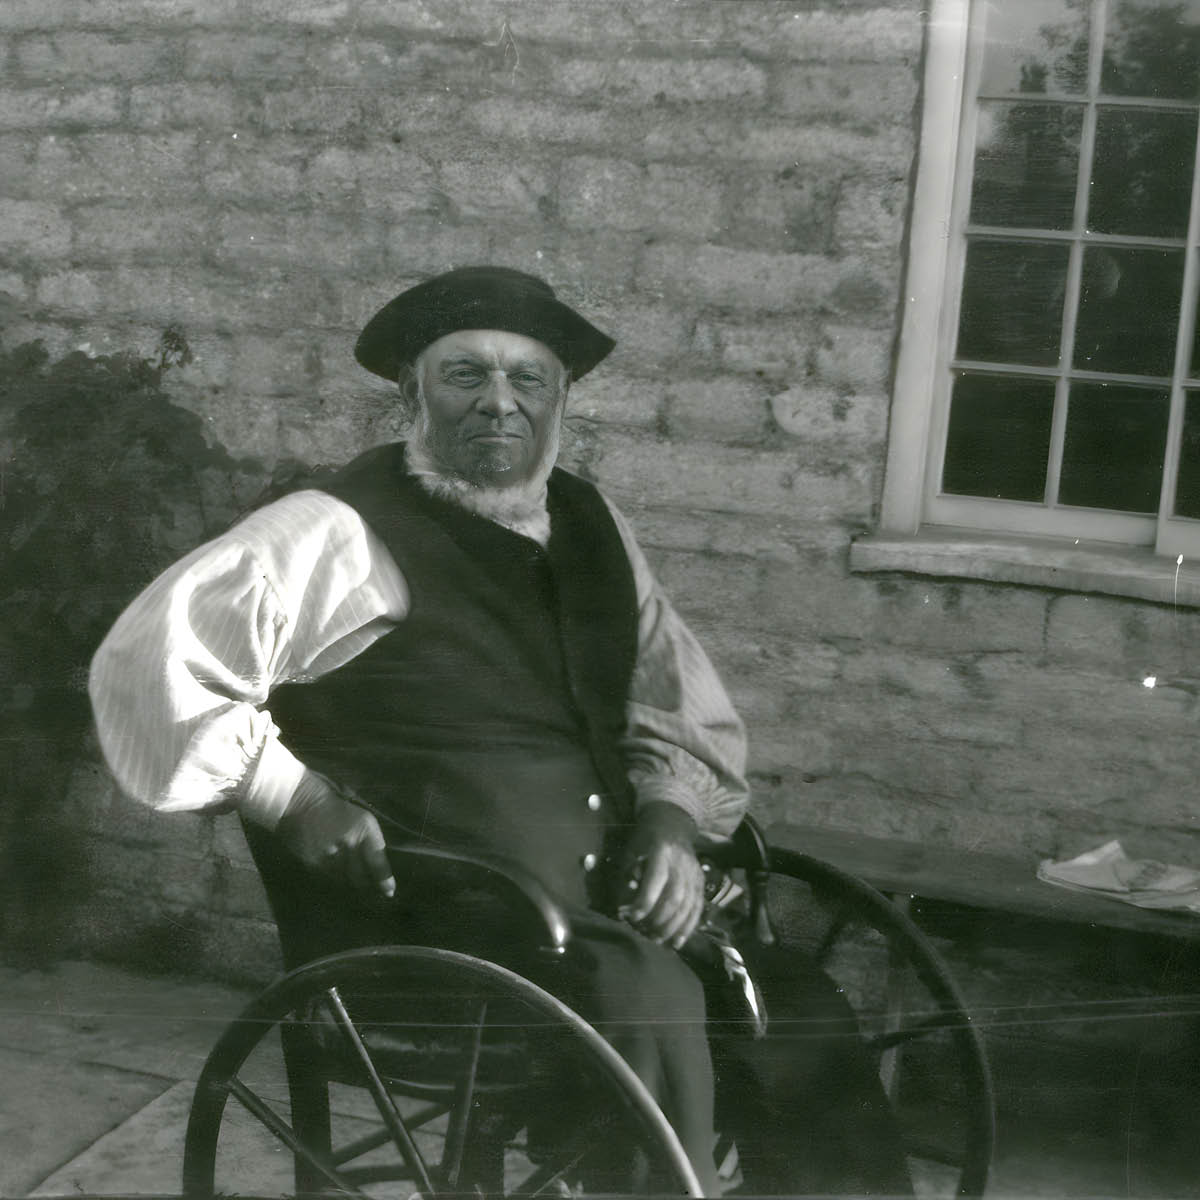 Man in wheelchair, smartly dressed in waistcoat and hat